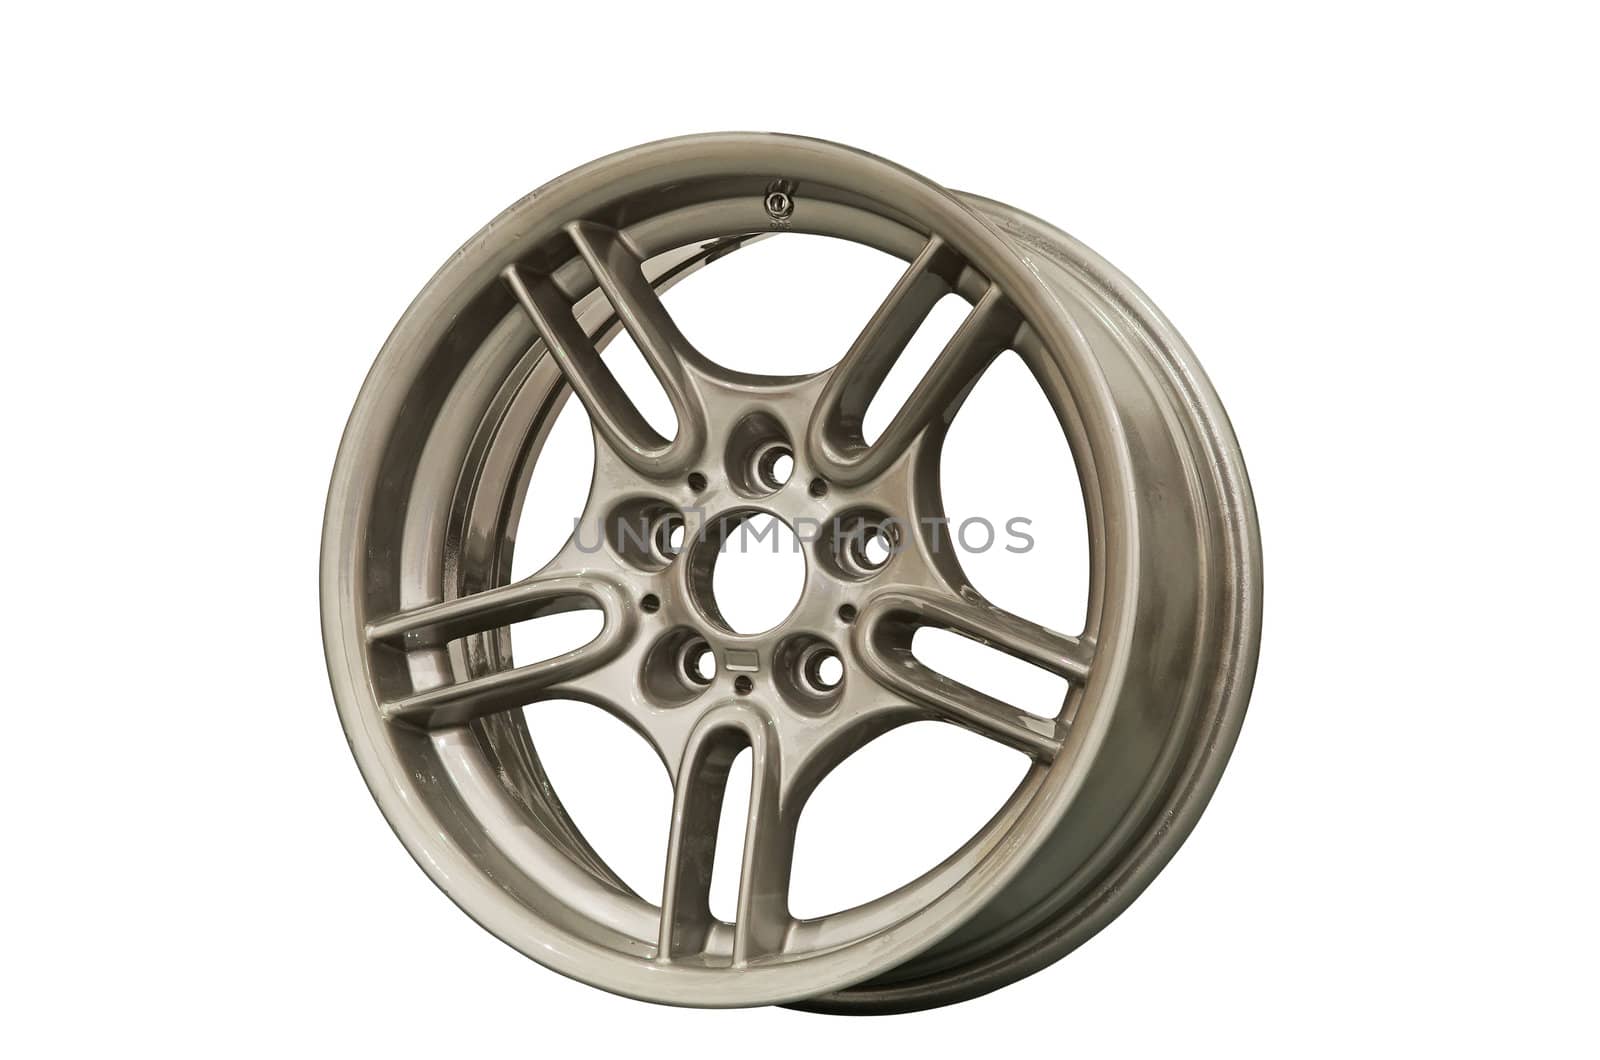 Sport alloy rims isolated on a white background